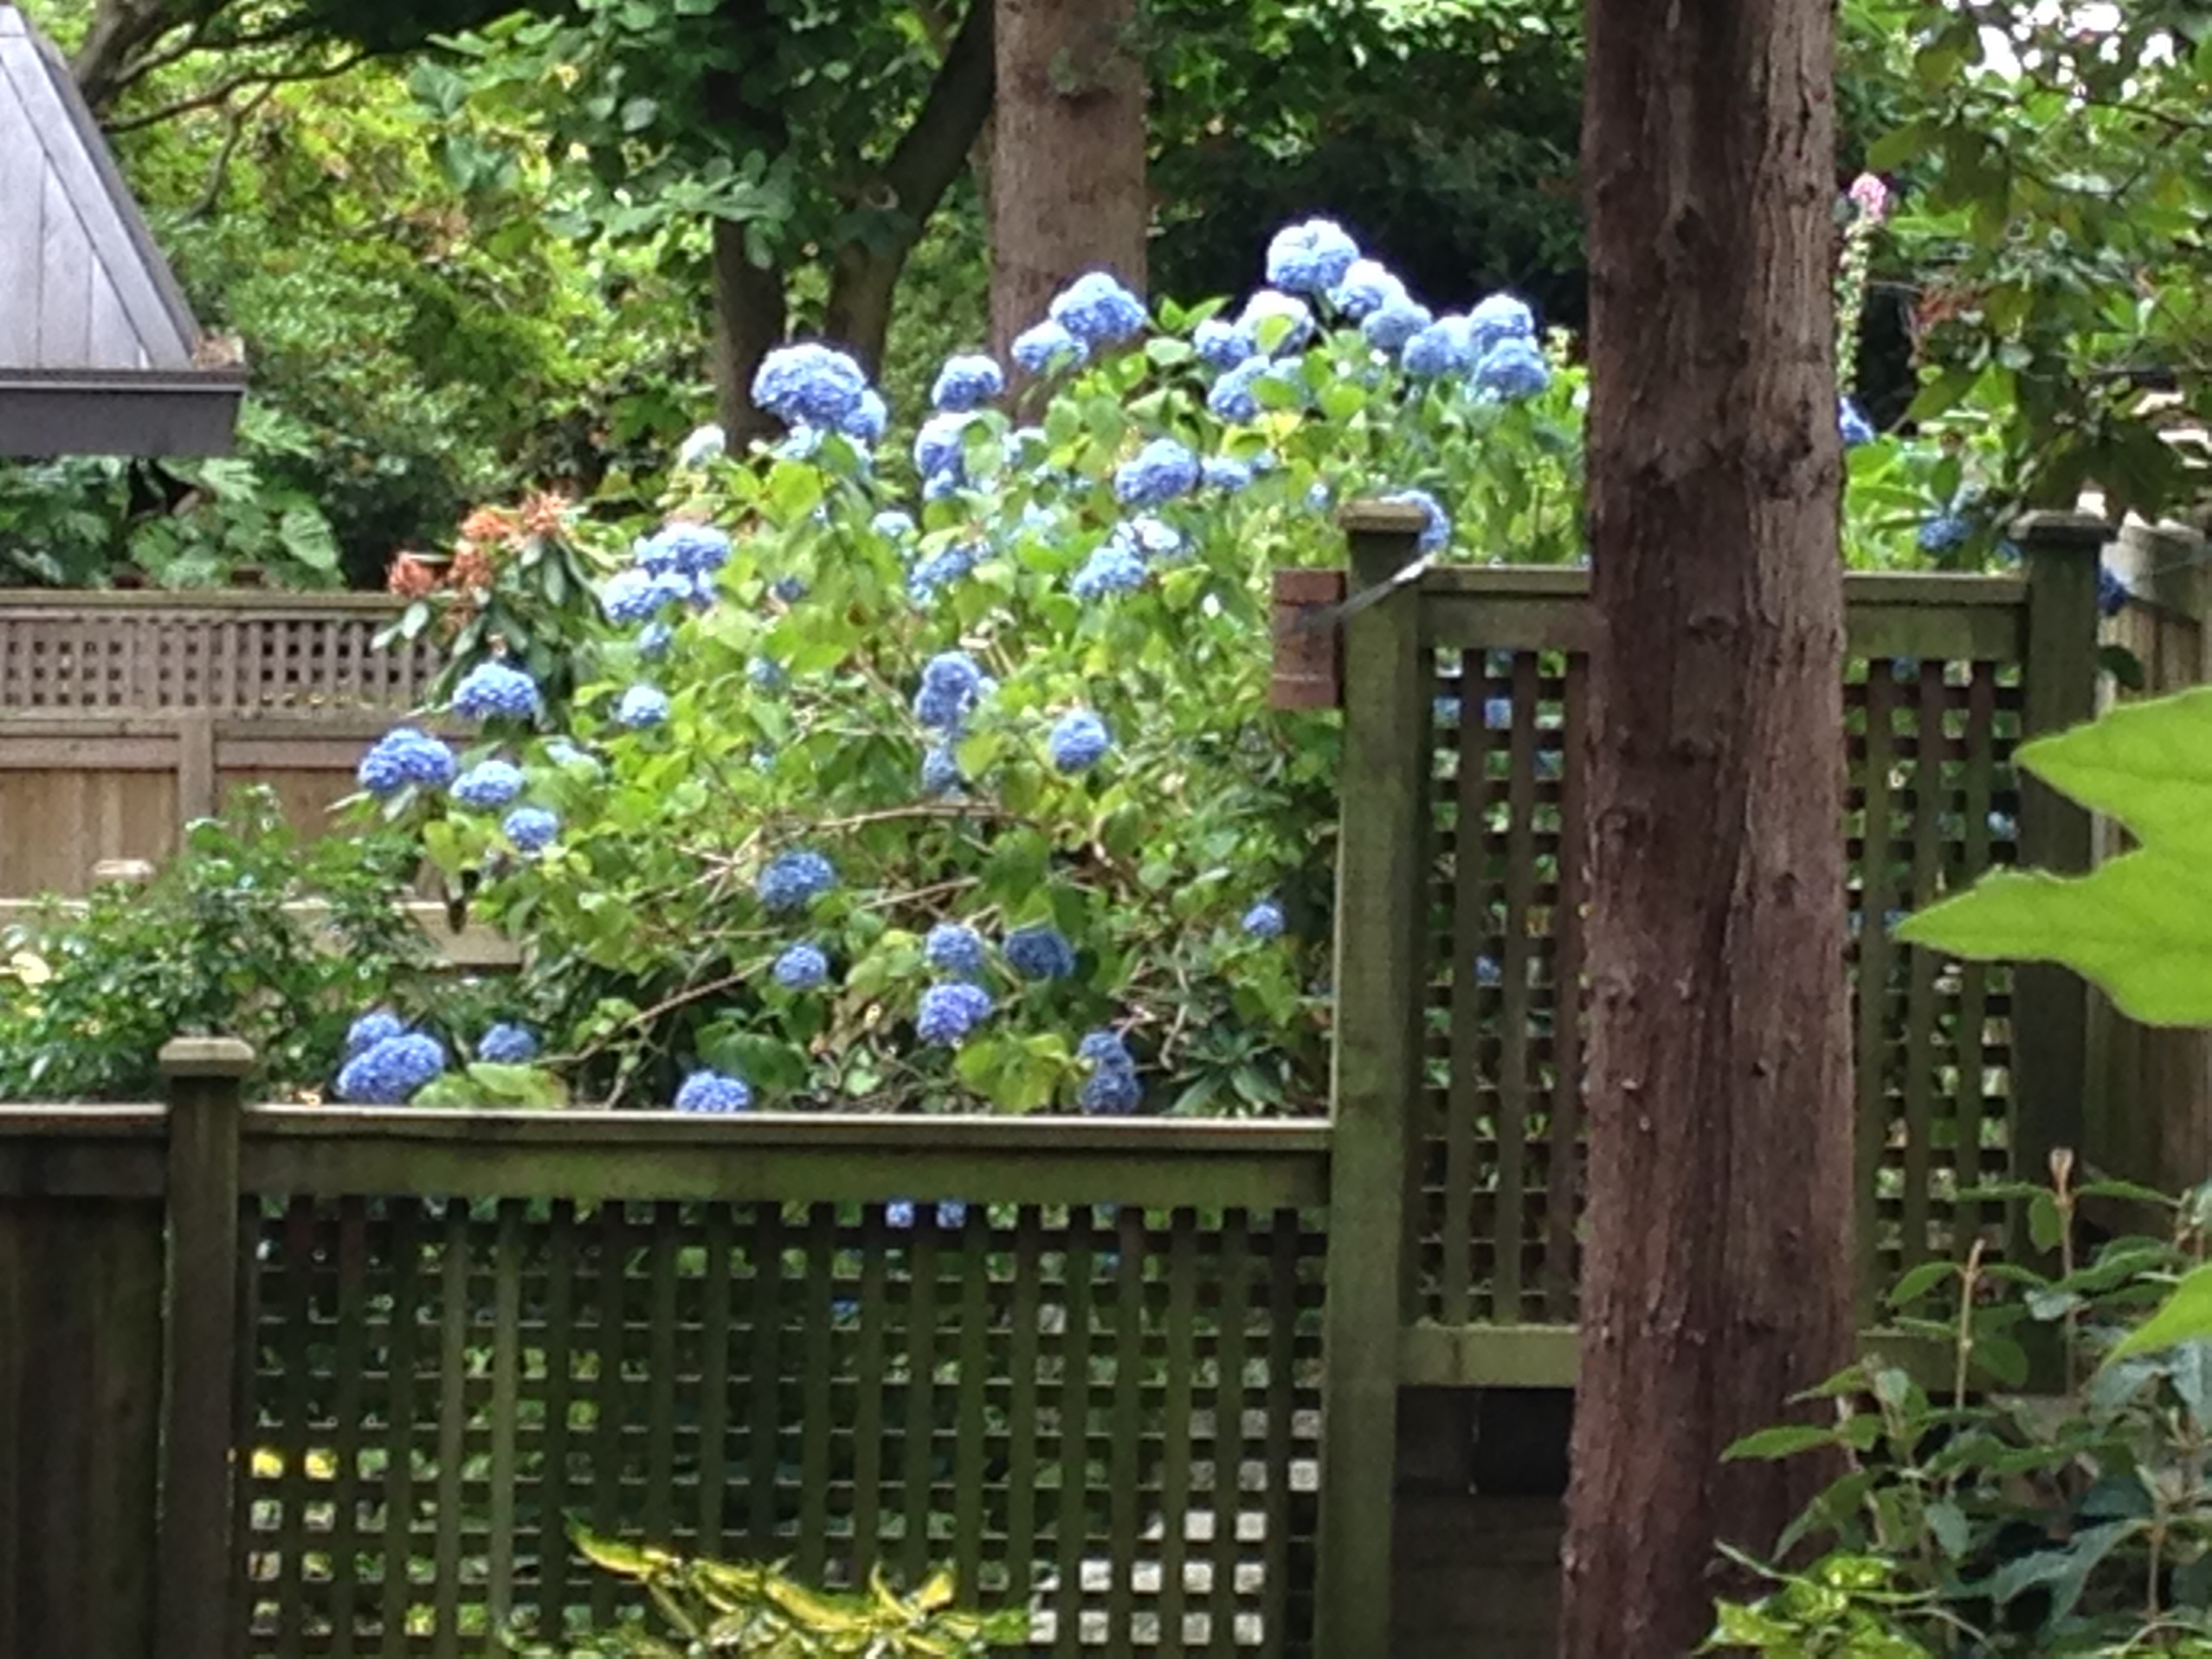 I photographed this hydrangea across several fences with my old I-phone so the quality isn't as good as I'd like. But you get the idea anyway.